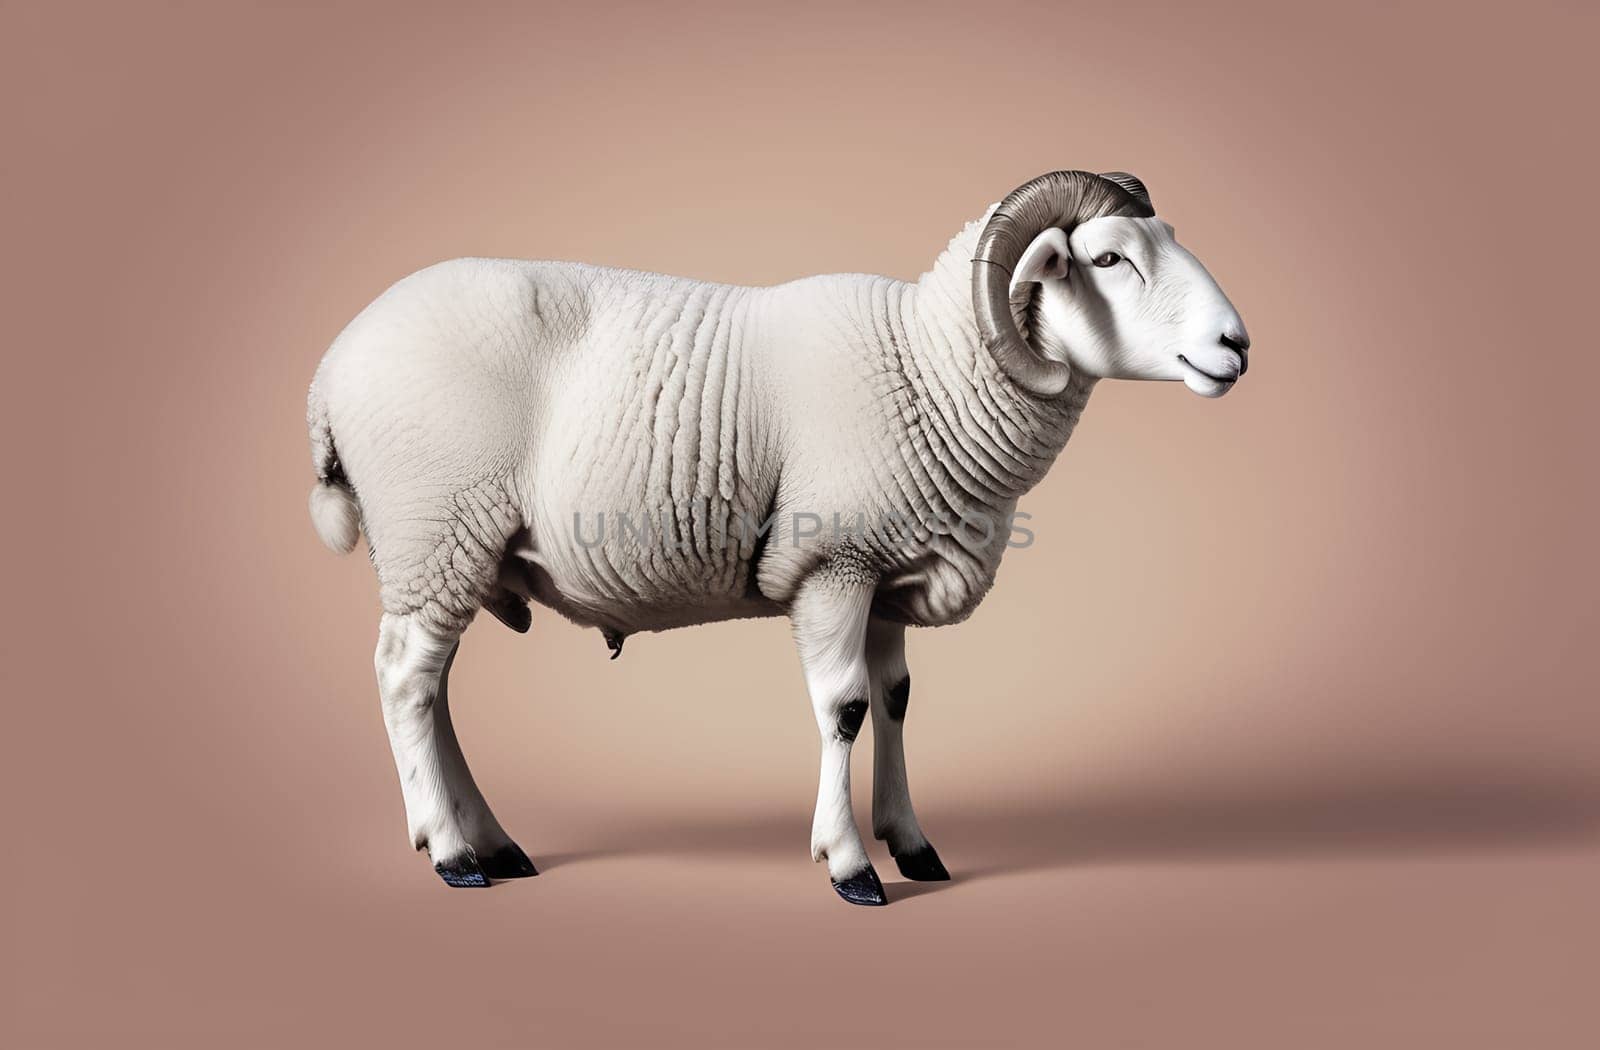 A white ram, highlighted on a beige background, stands sideways.